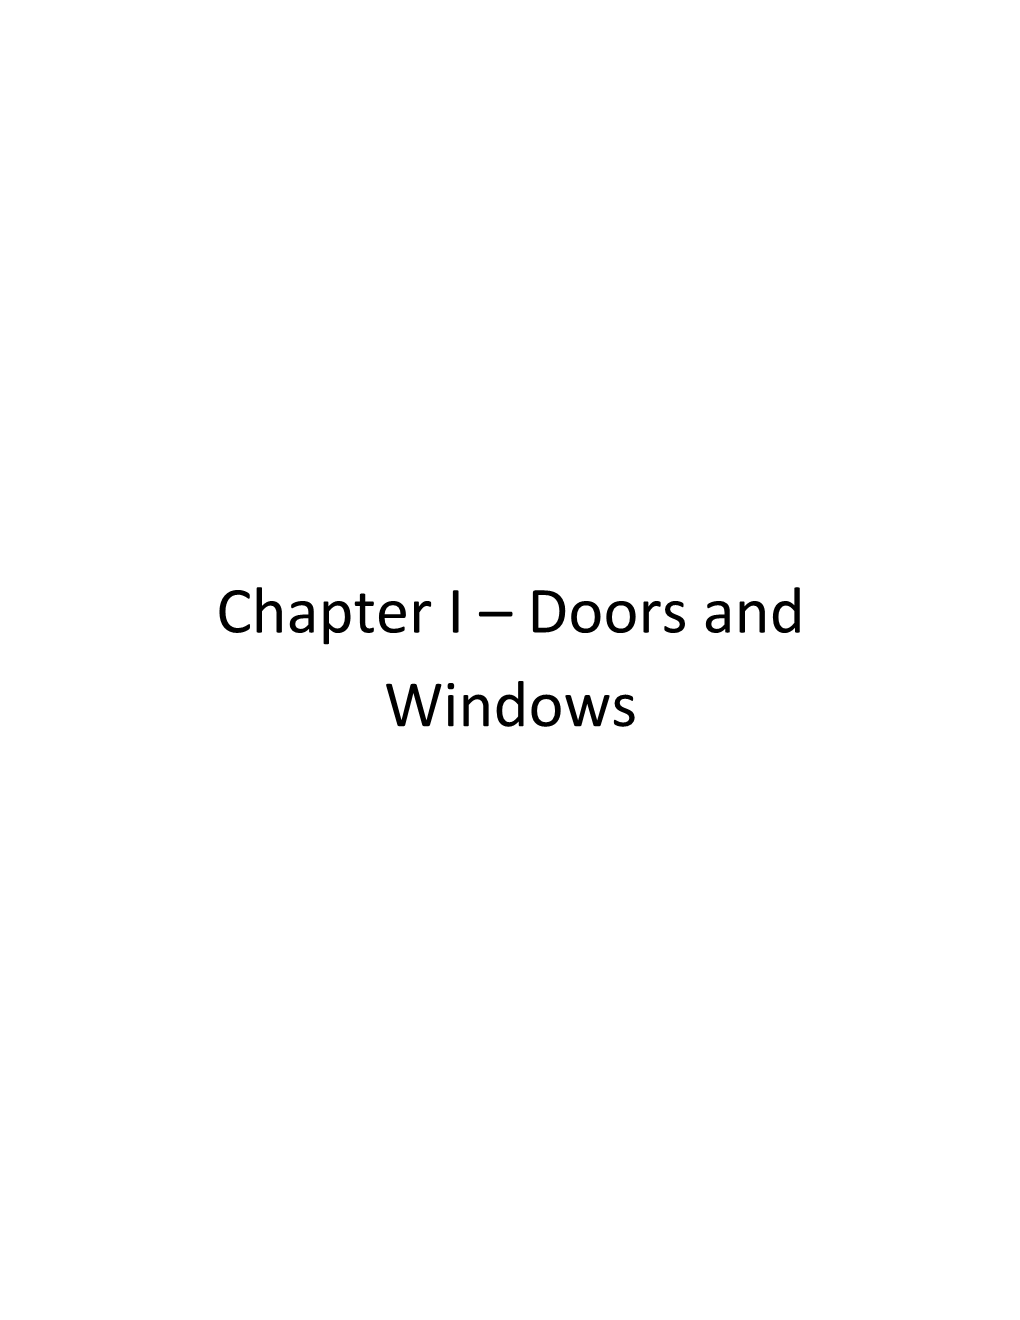 Chapter I Doors and Windows